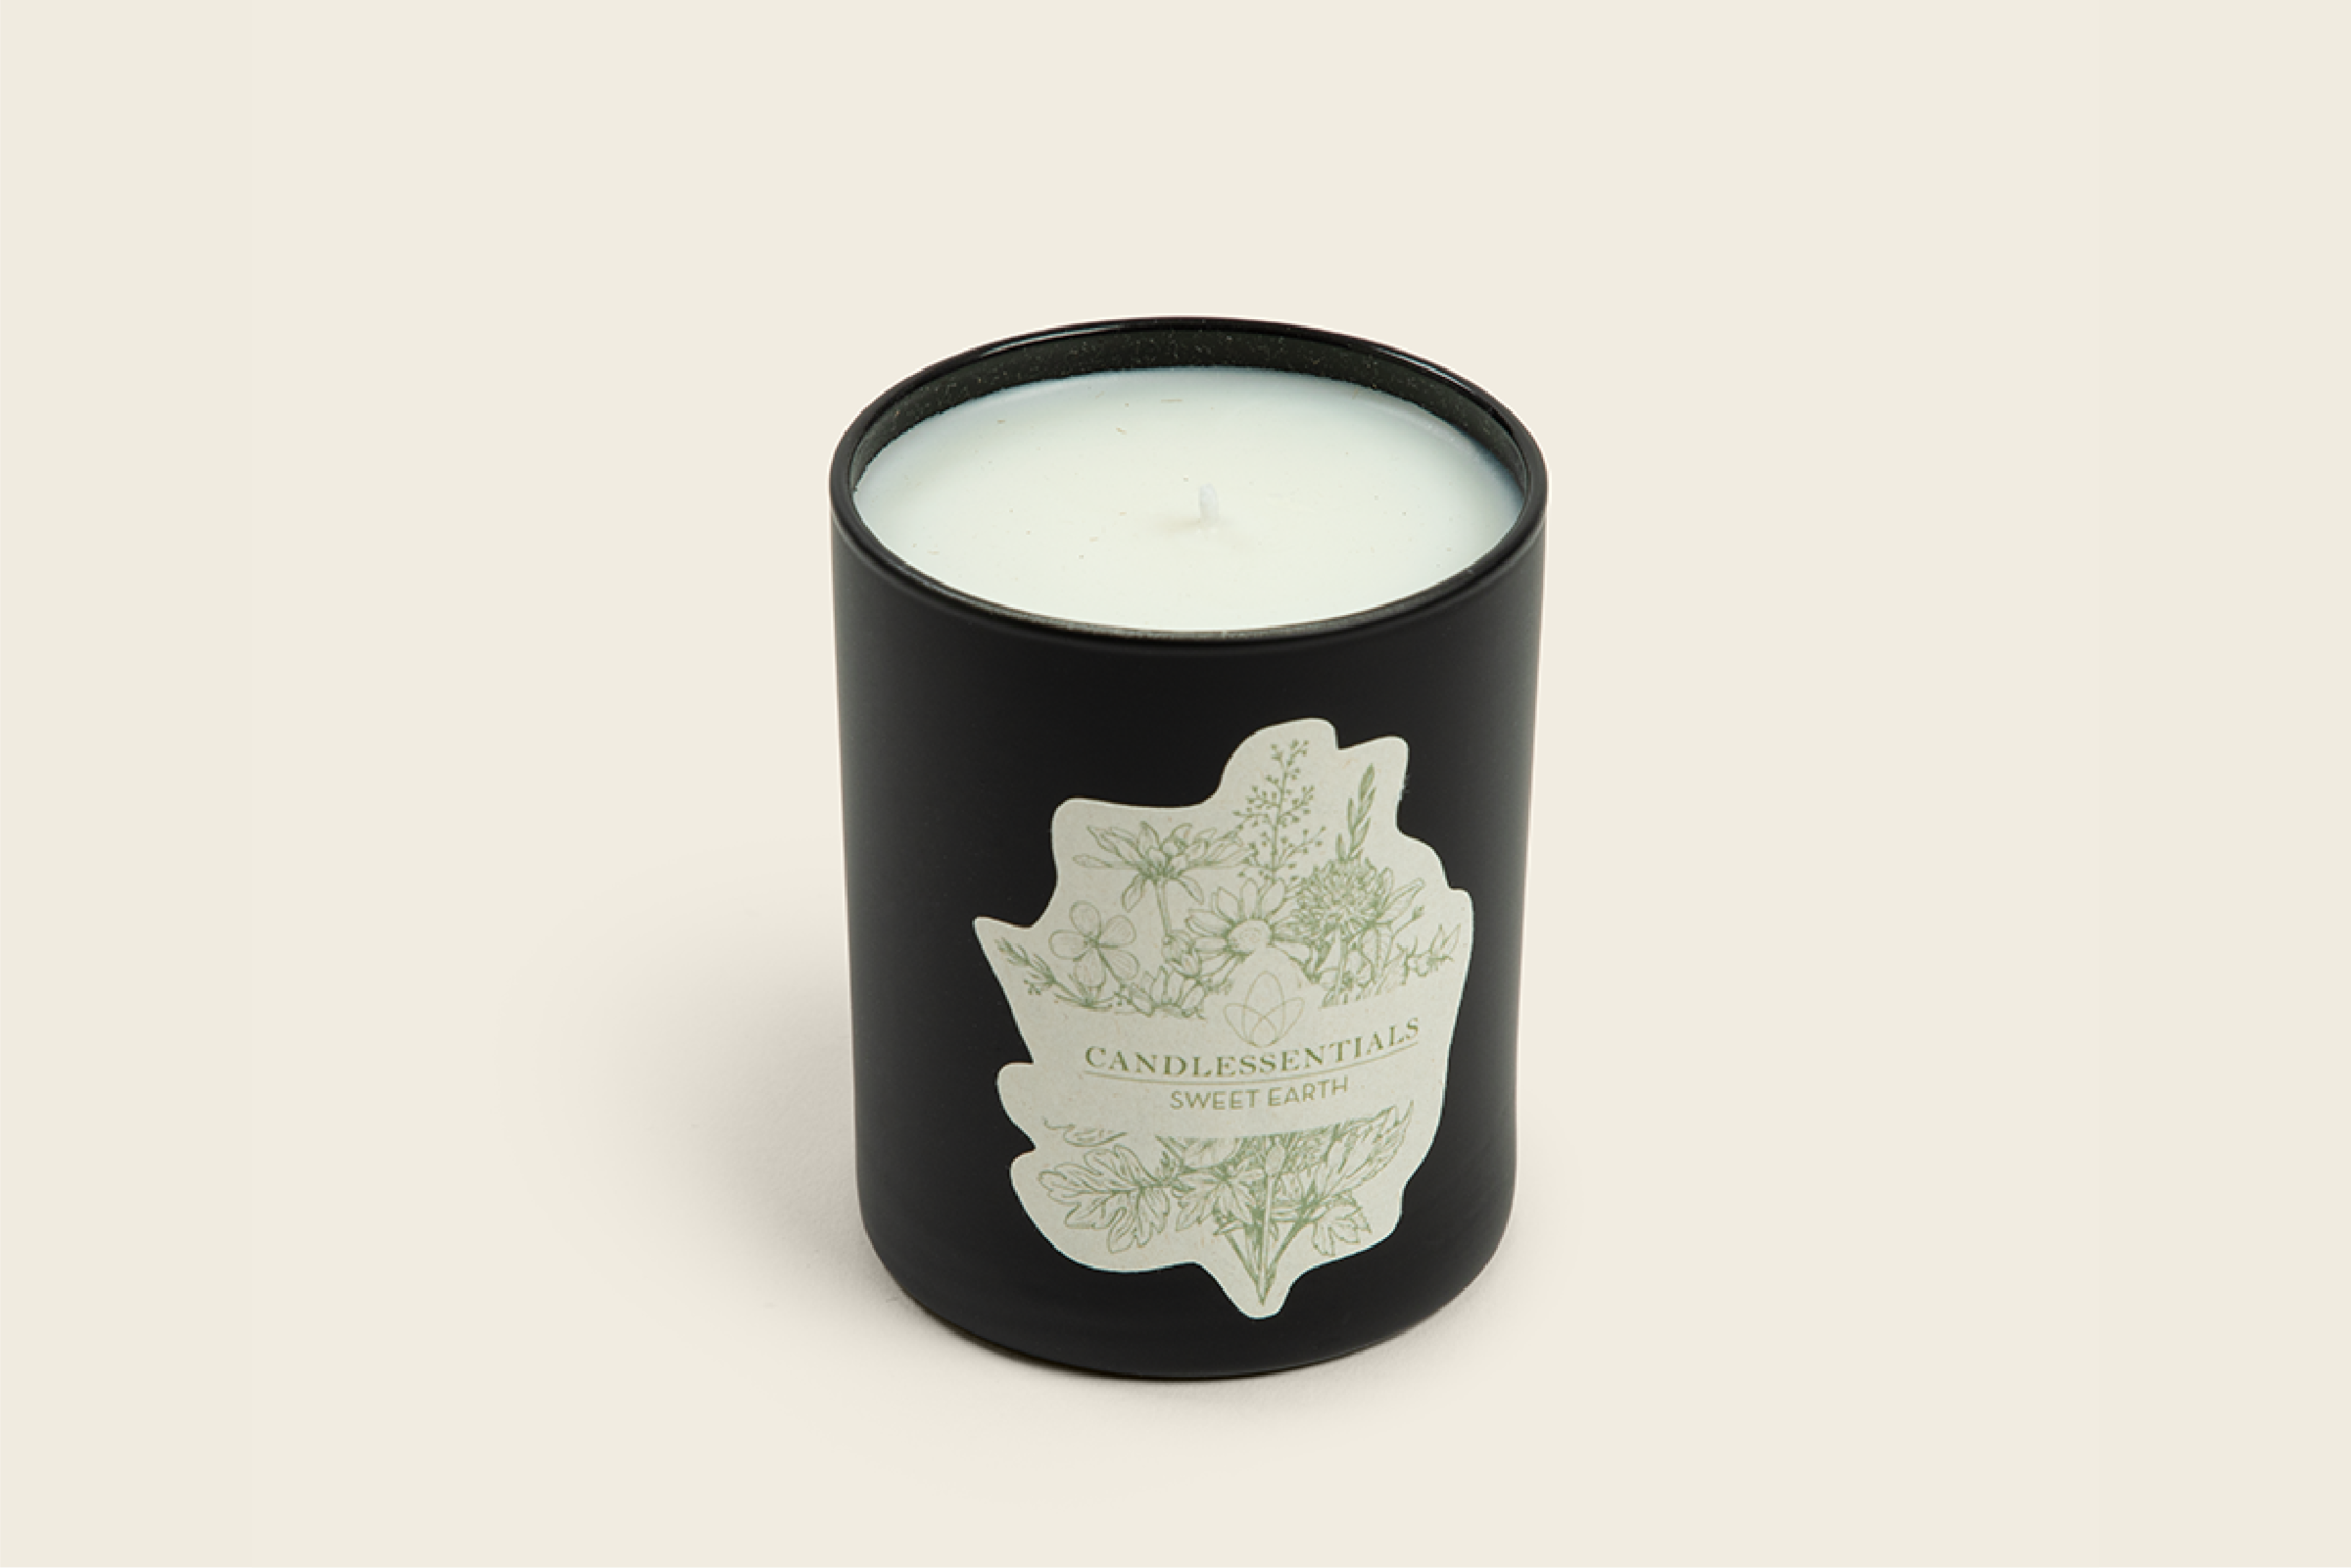 Small-Batch Scented Candle by Candlessentials